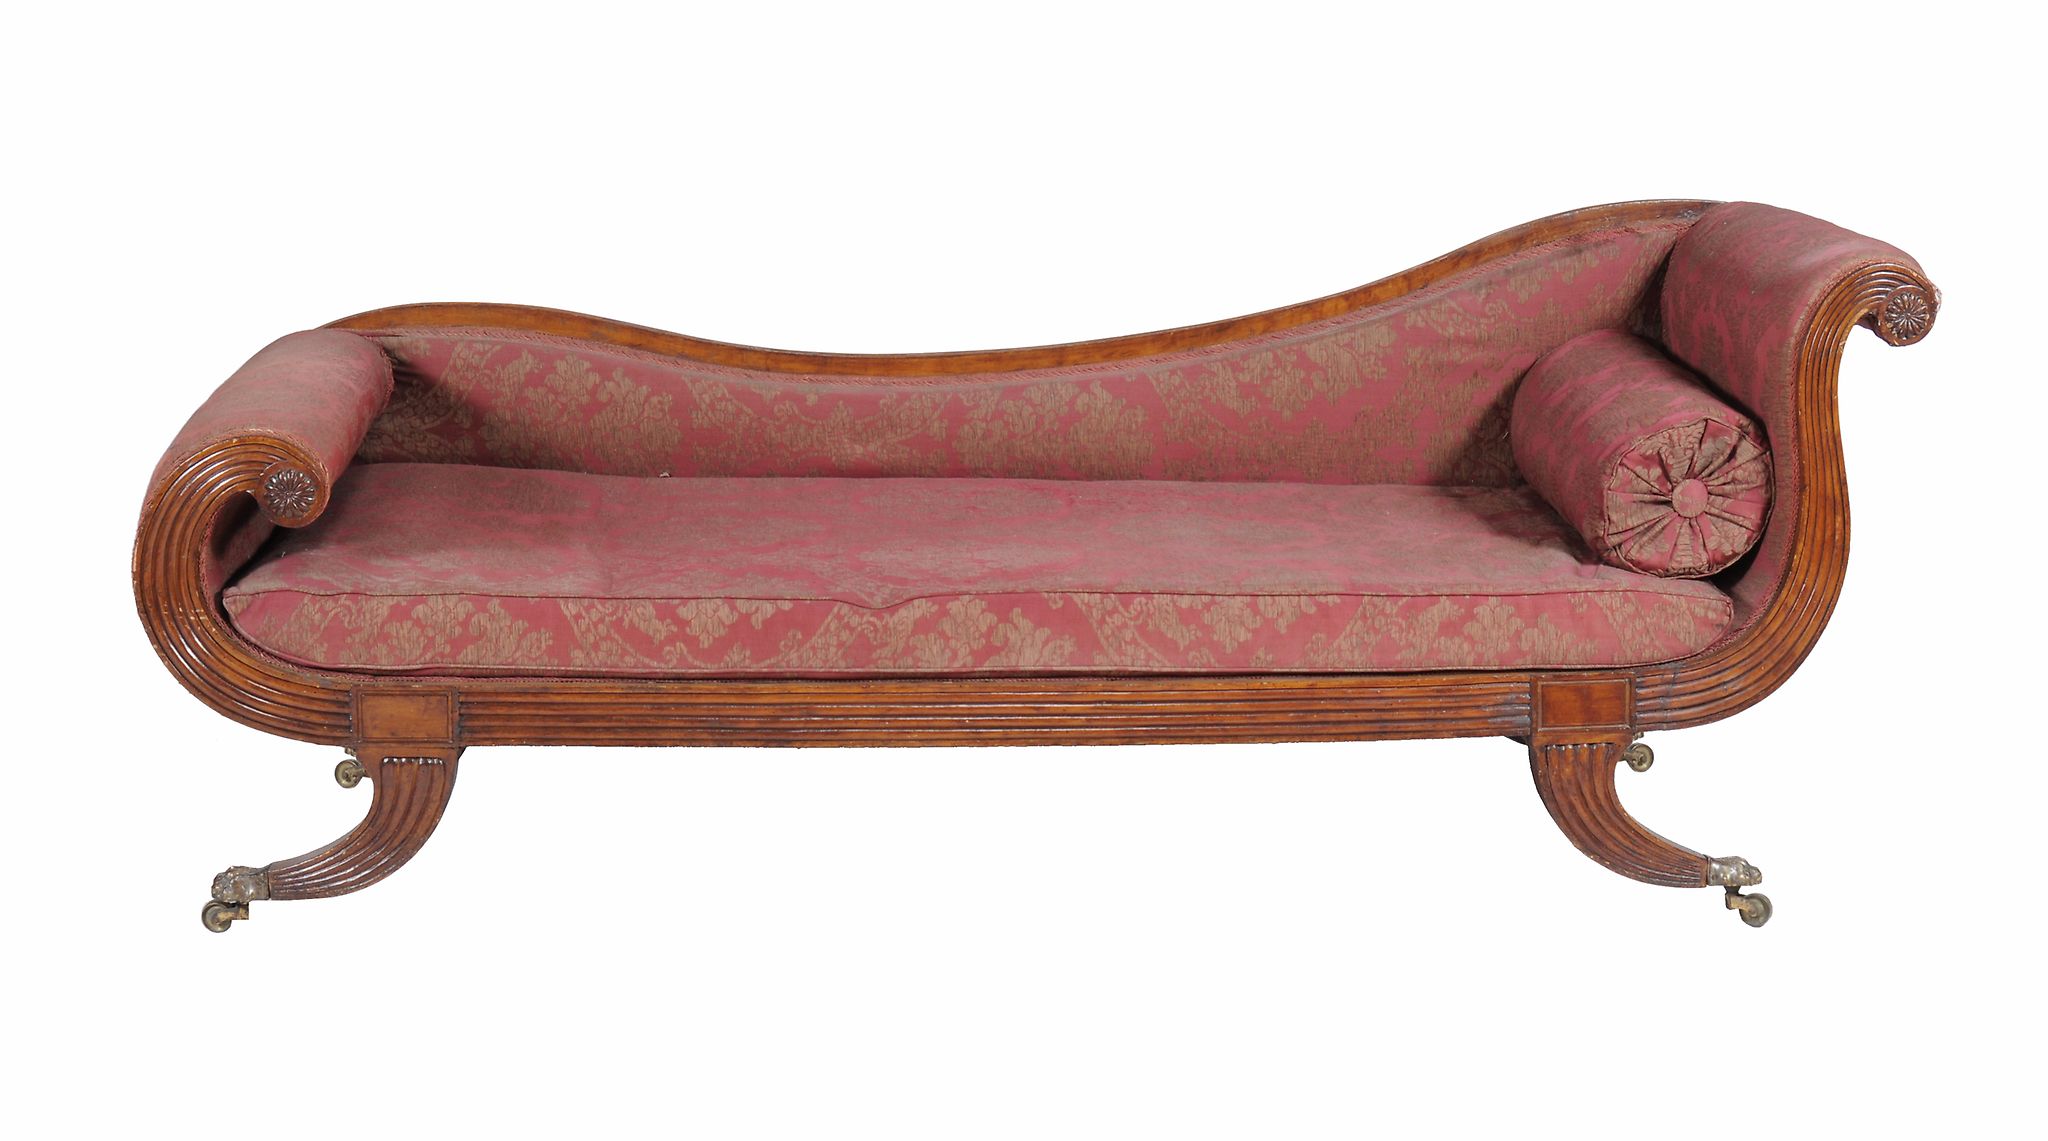 A George IV mahogany chaise longue , circa 1825, in the manner of Gillows, with scrolled ends and - Image 2 of 3